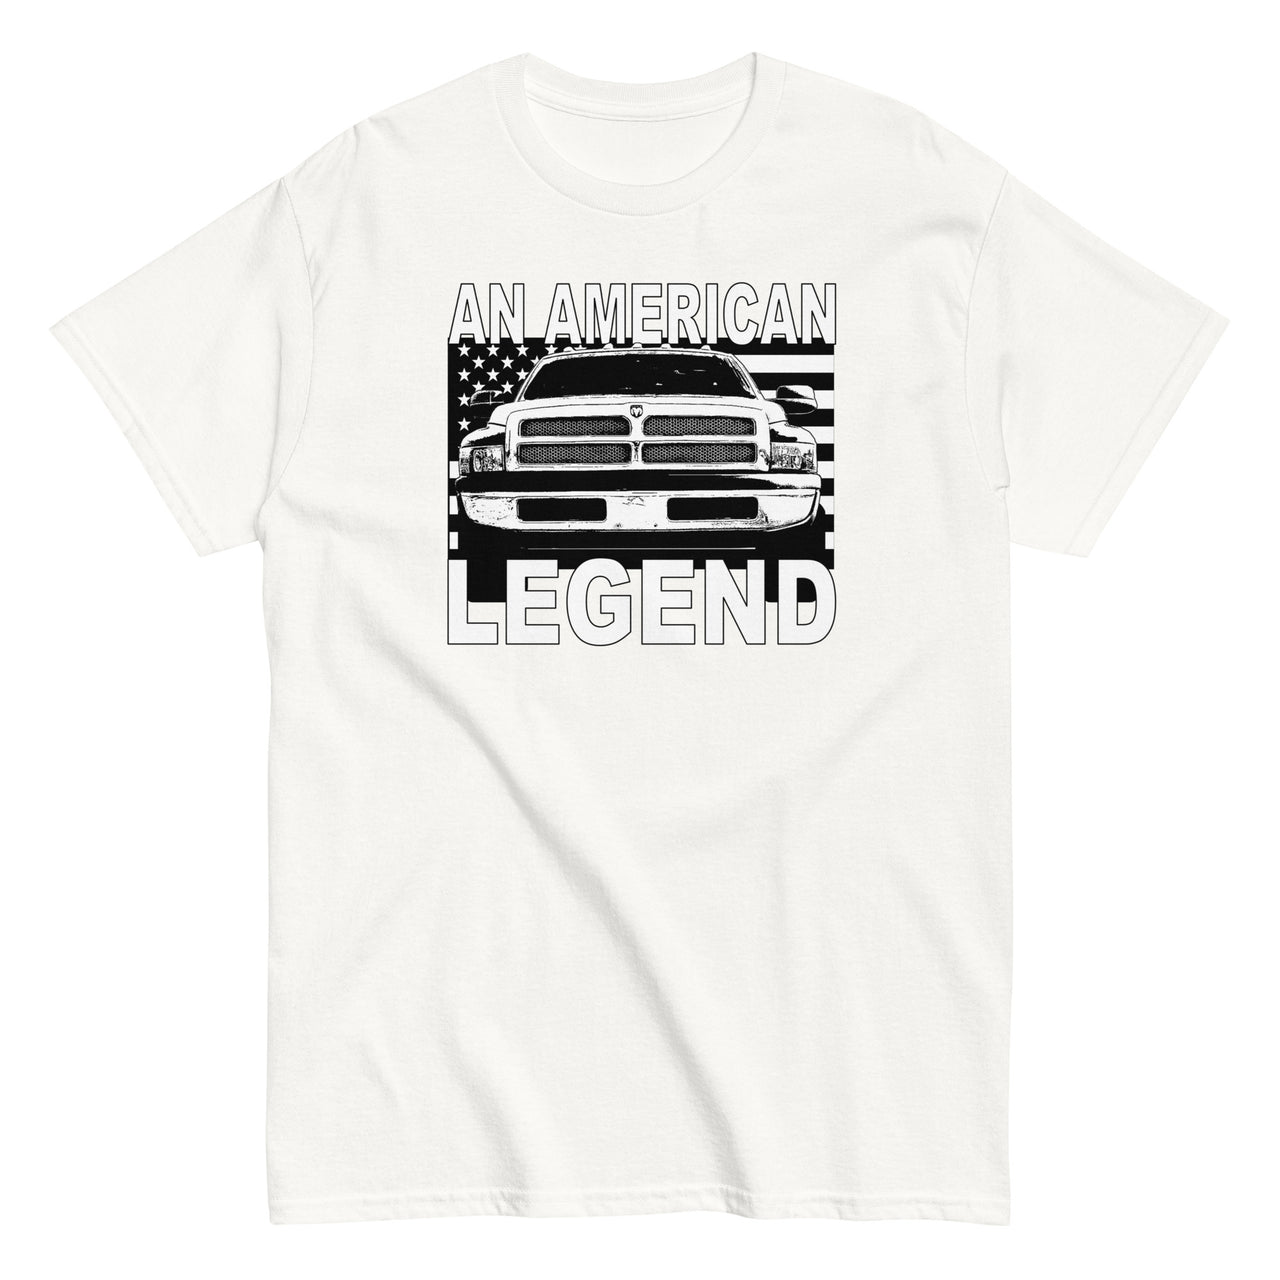 2nd Gen Truck T-Shirt With American Flag Design-In-White-From Aggressive Thread